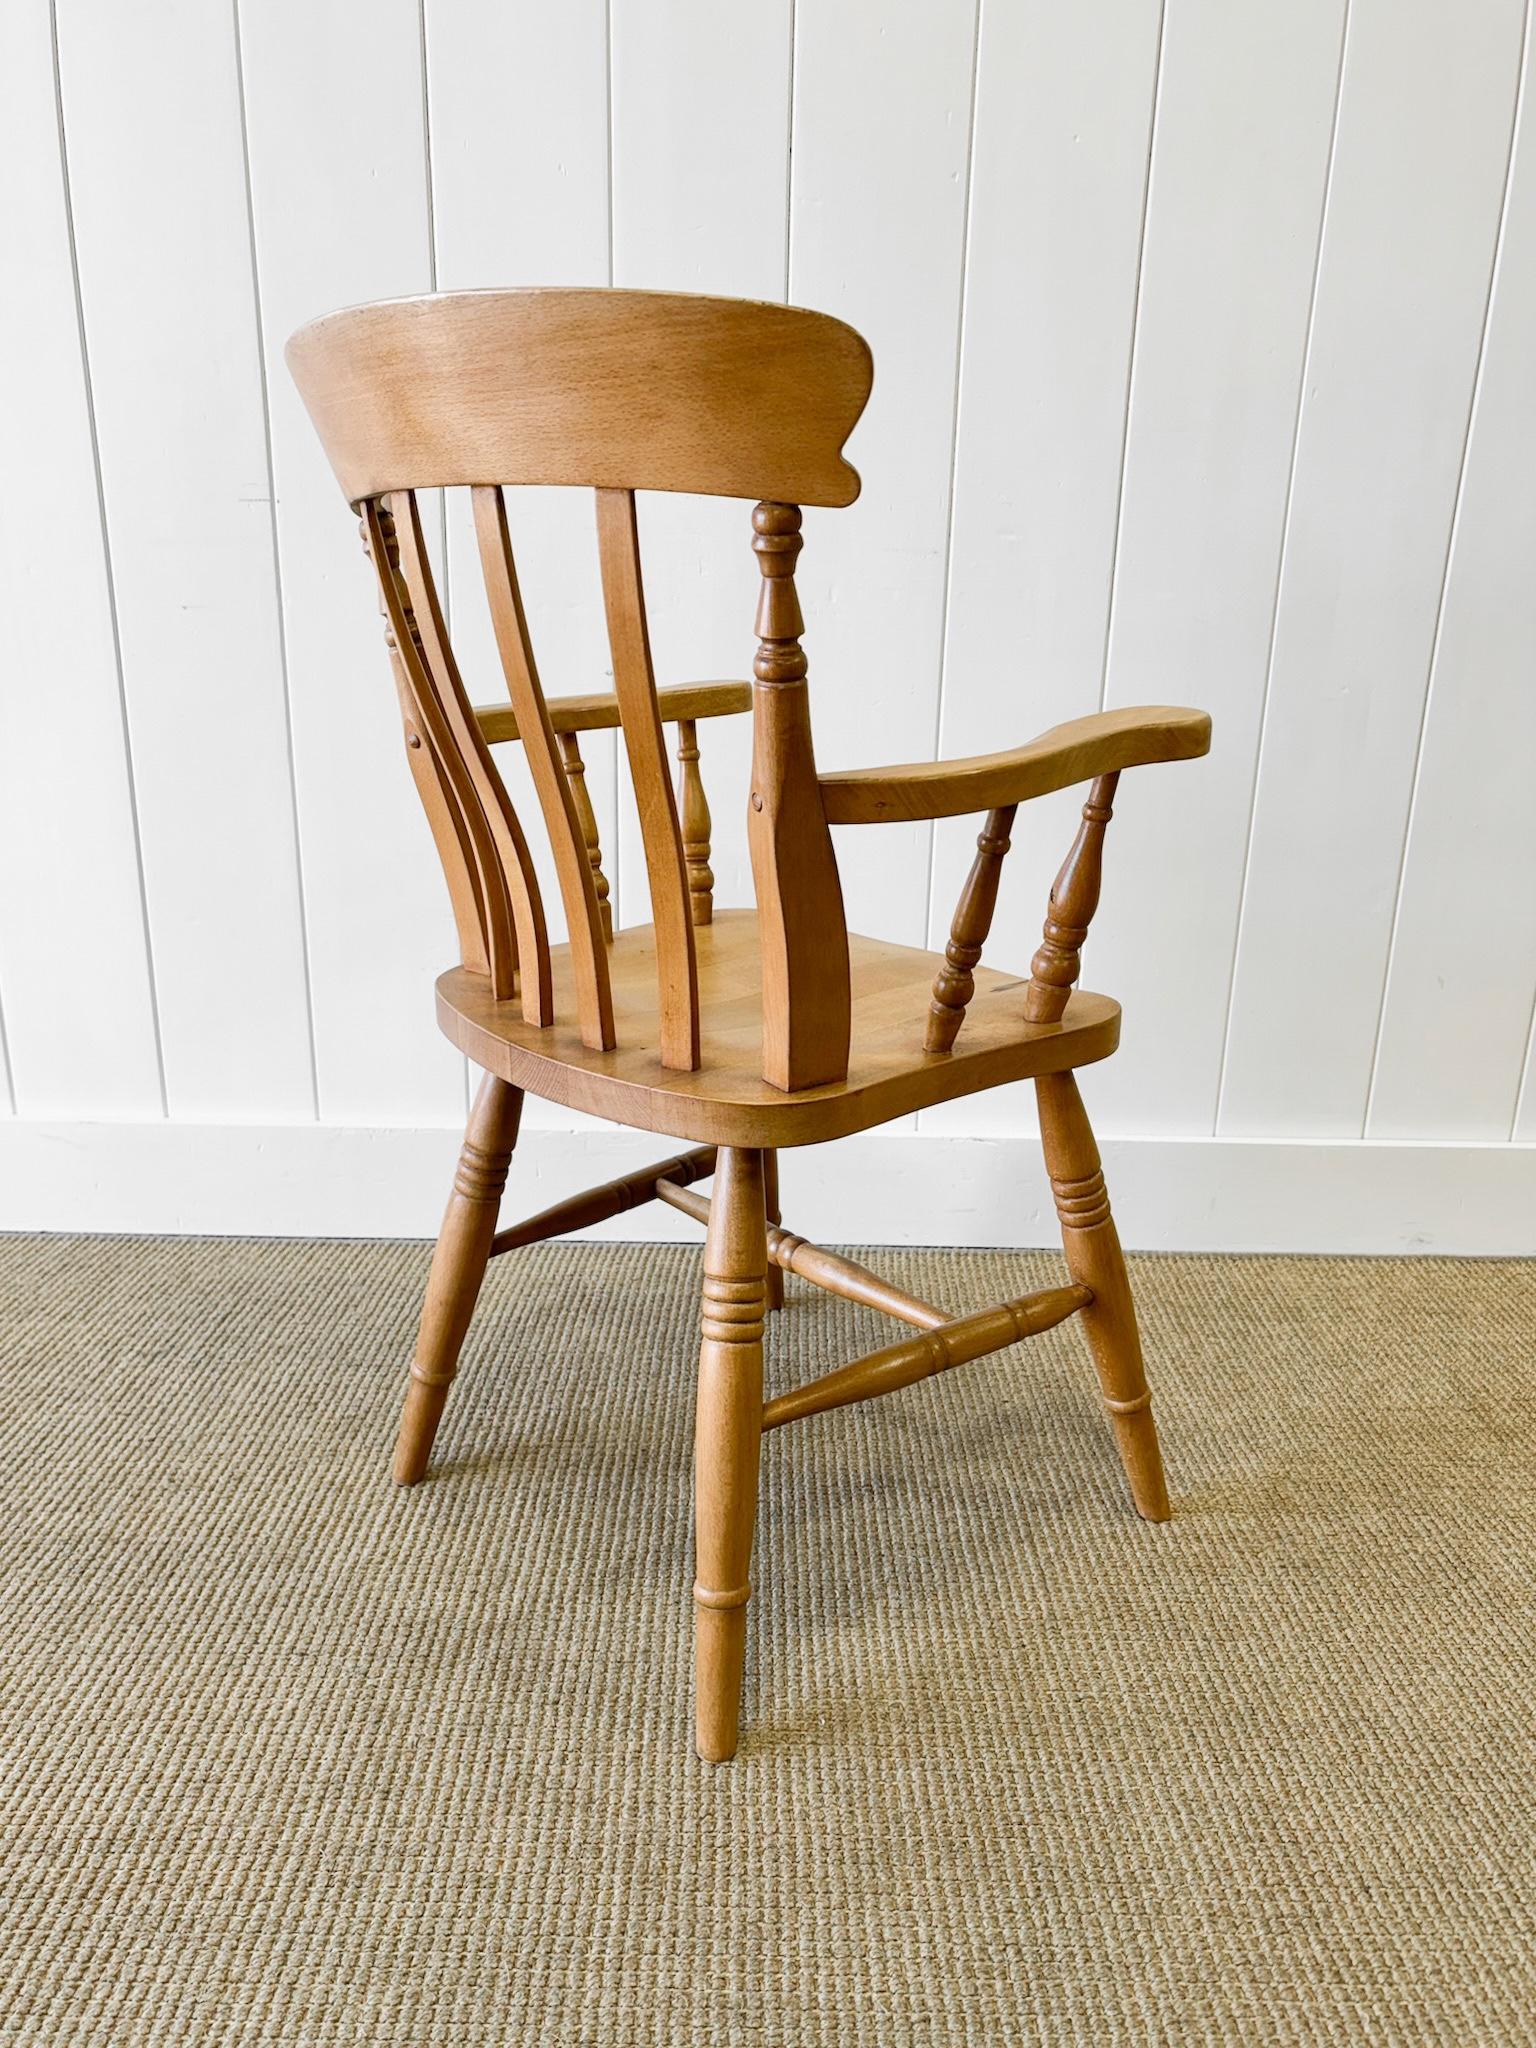 An English Country Slat Back Arm Chair  For Sale 2